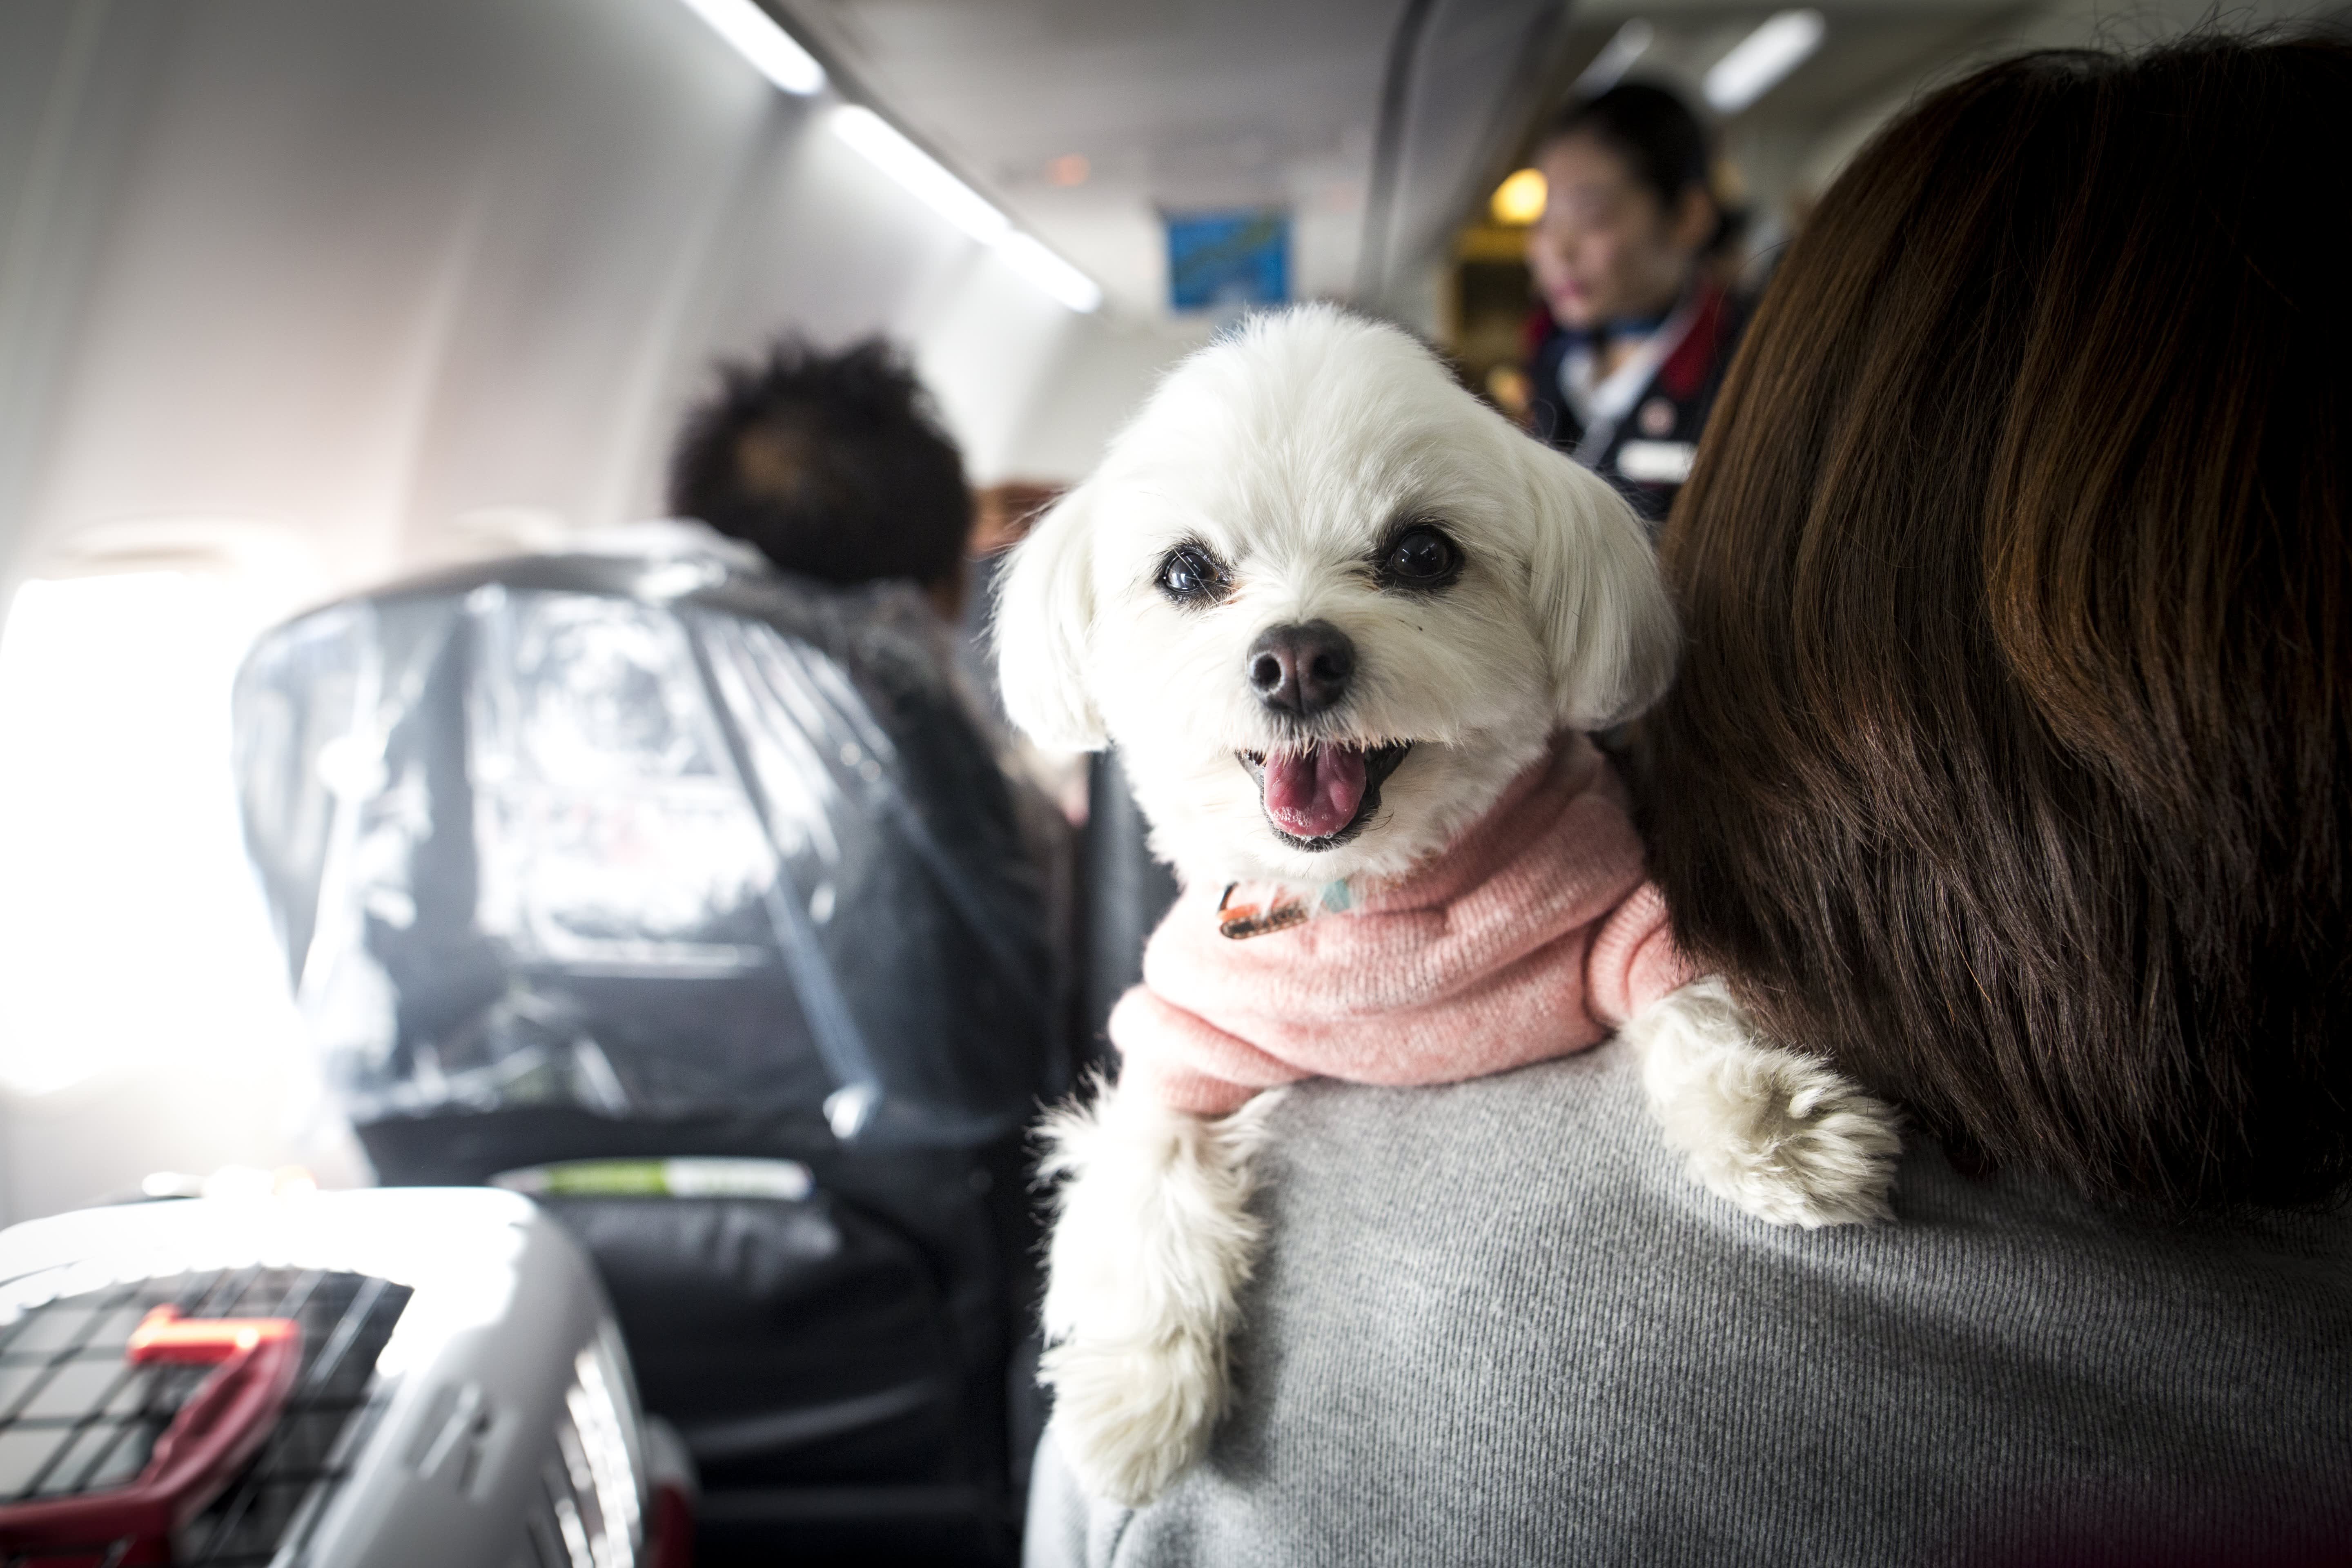 southwest cost to fly a dog